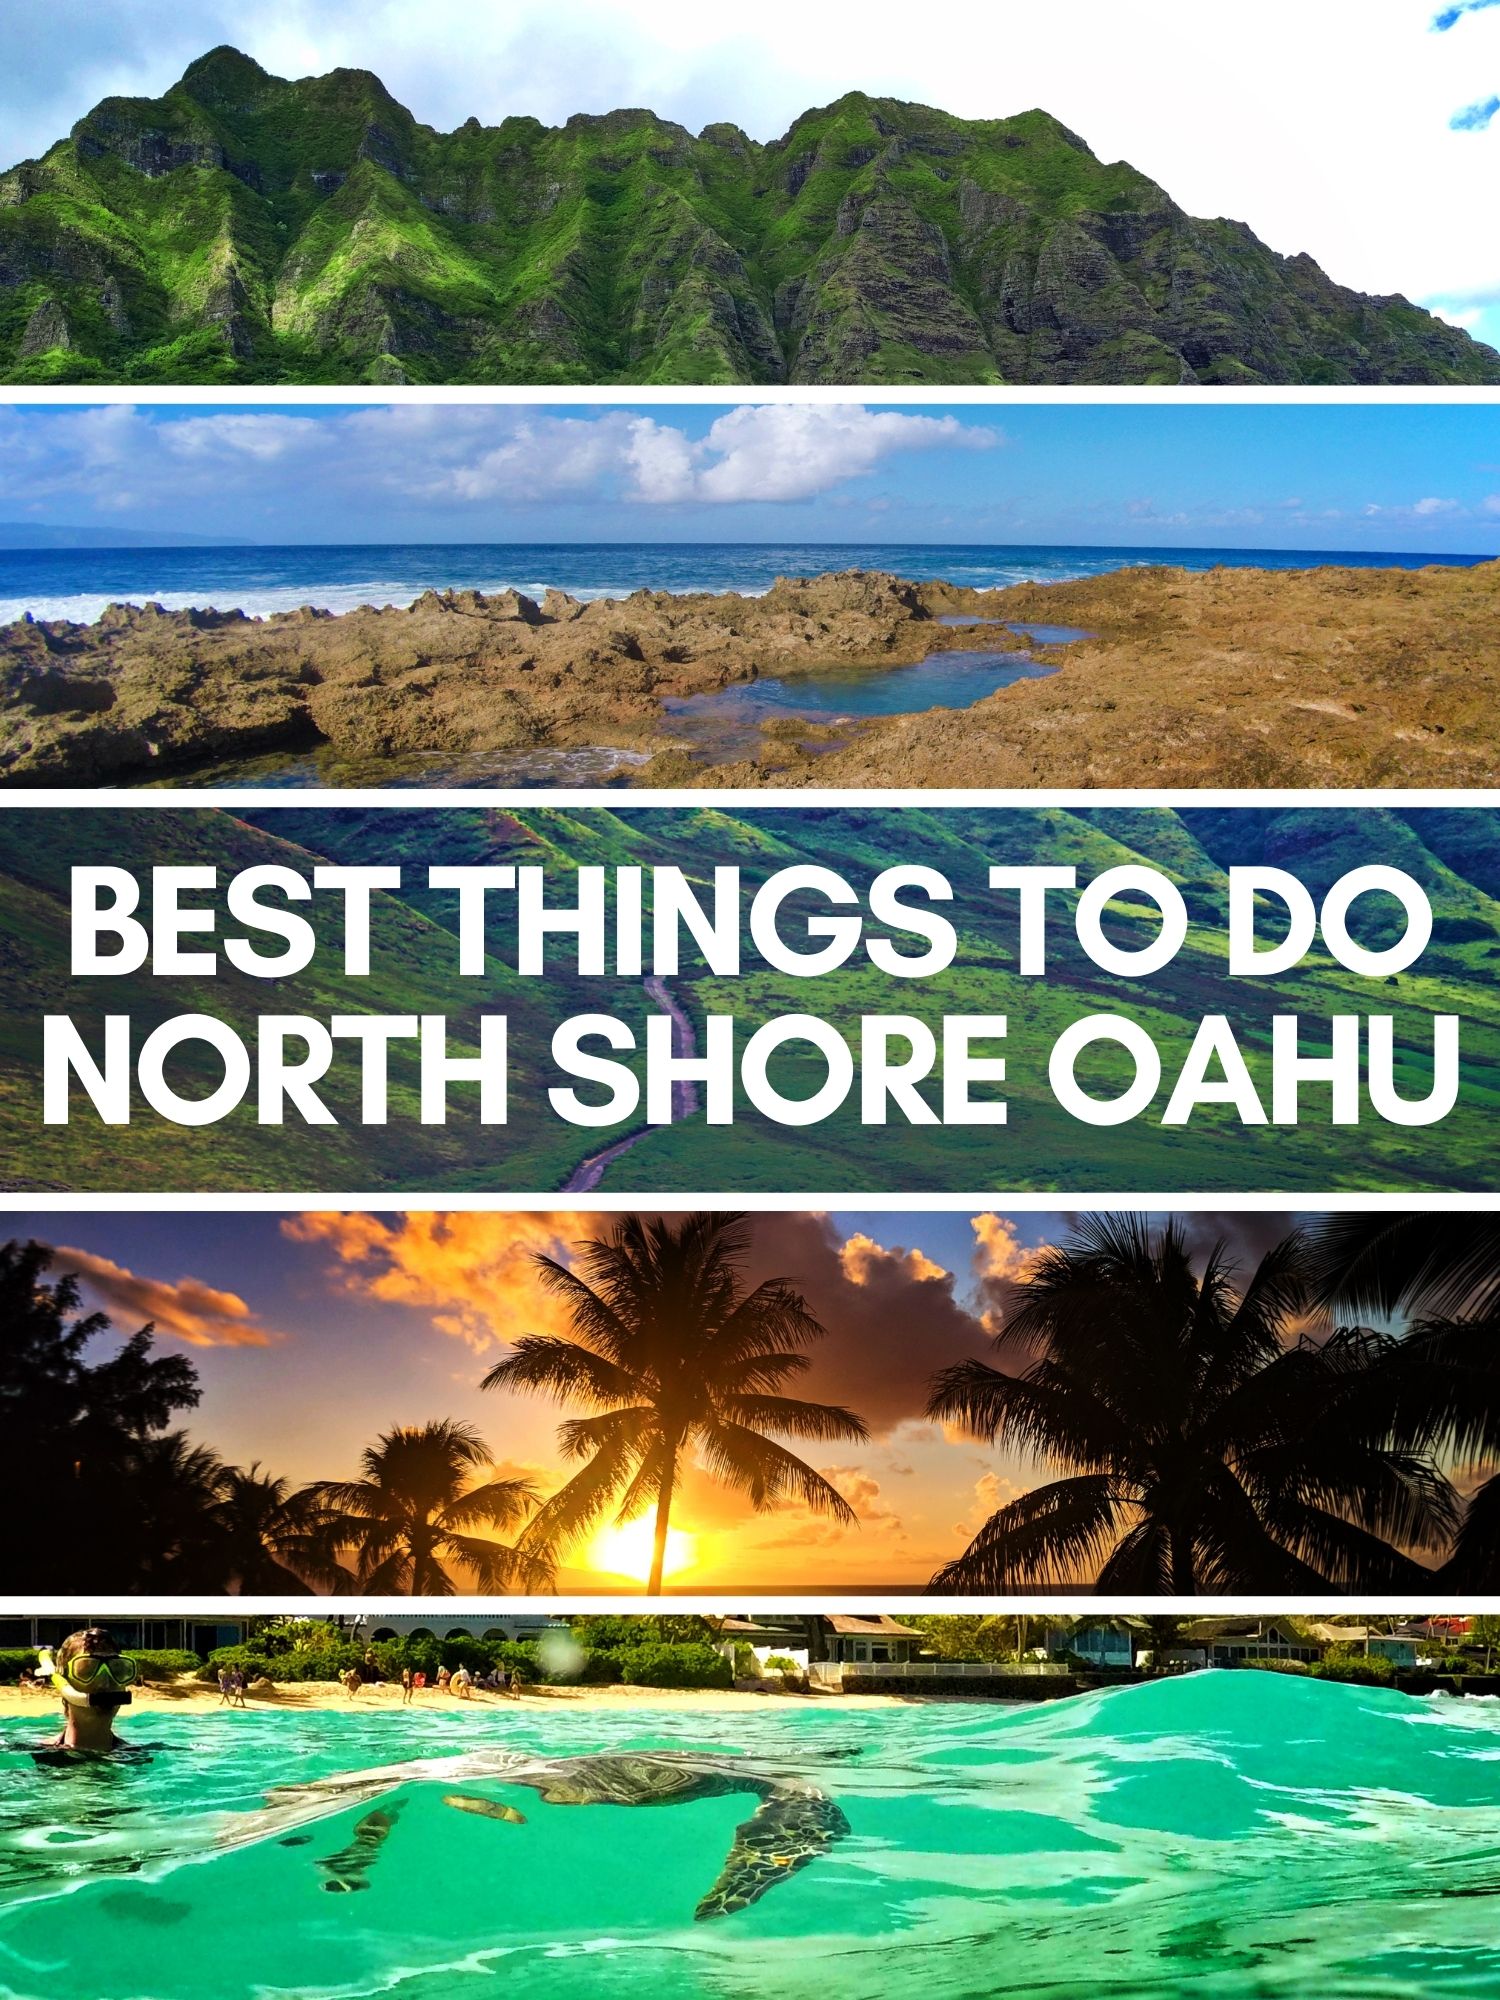 Thrilling and fun things to do on Oahu's North Shore are everywhere. From free things to do such as hiking and watching the perfect sunset, to tours and food trucks at night, the North Shore has the best activities on Oahu.